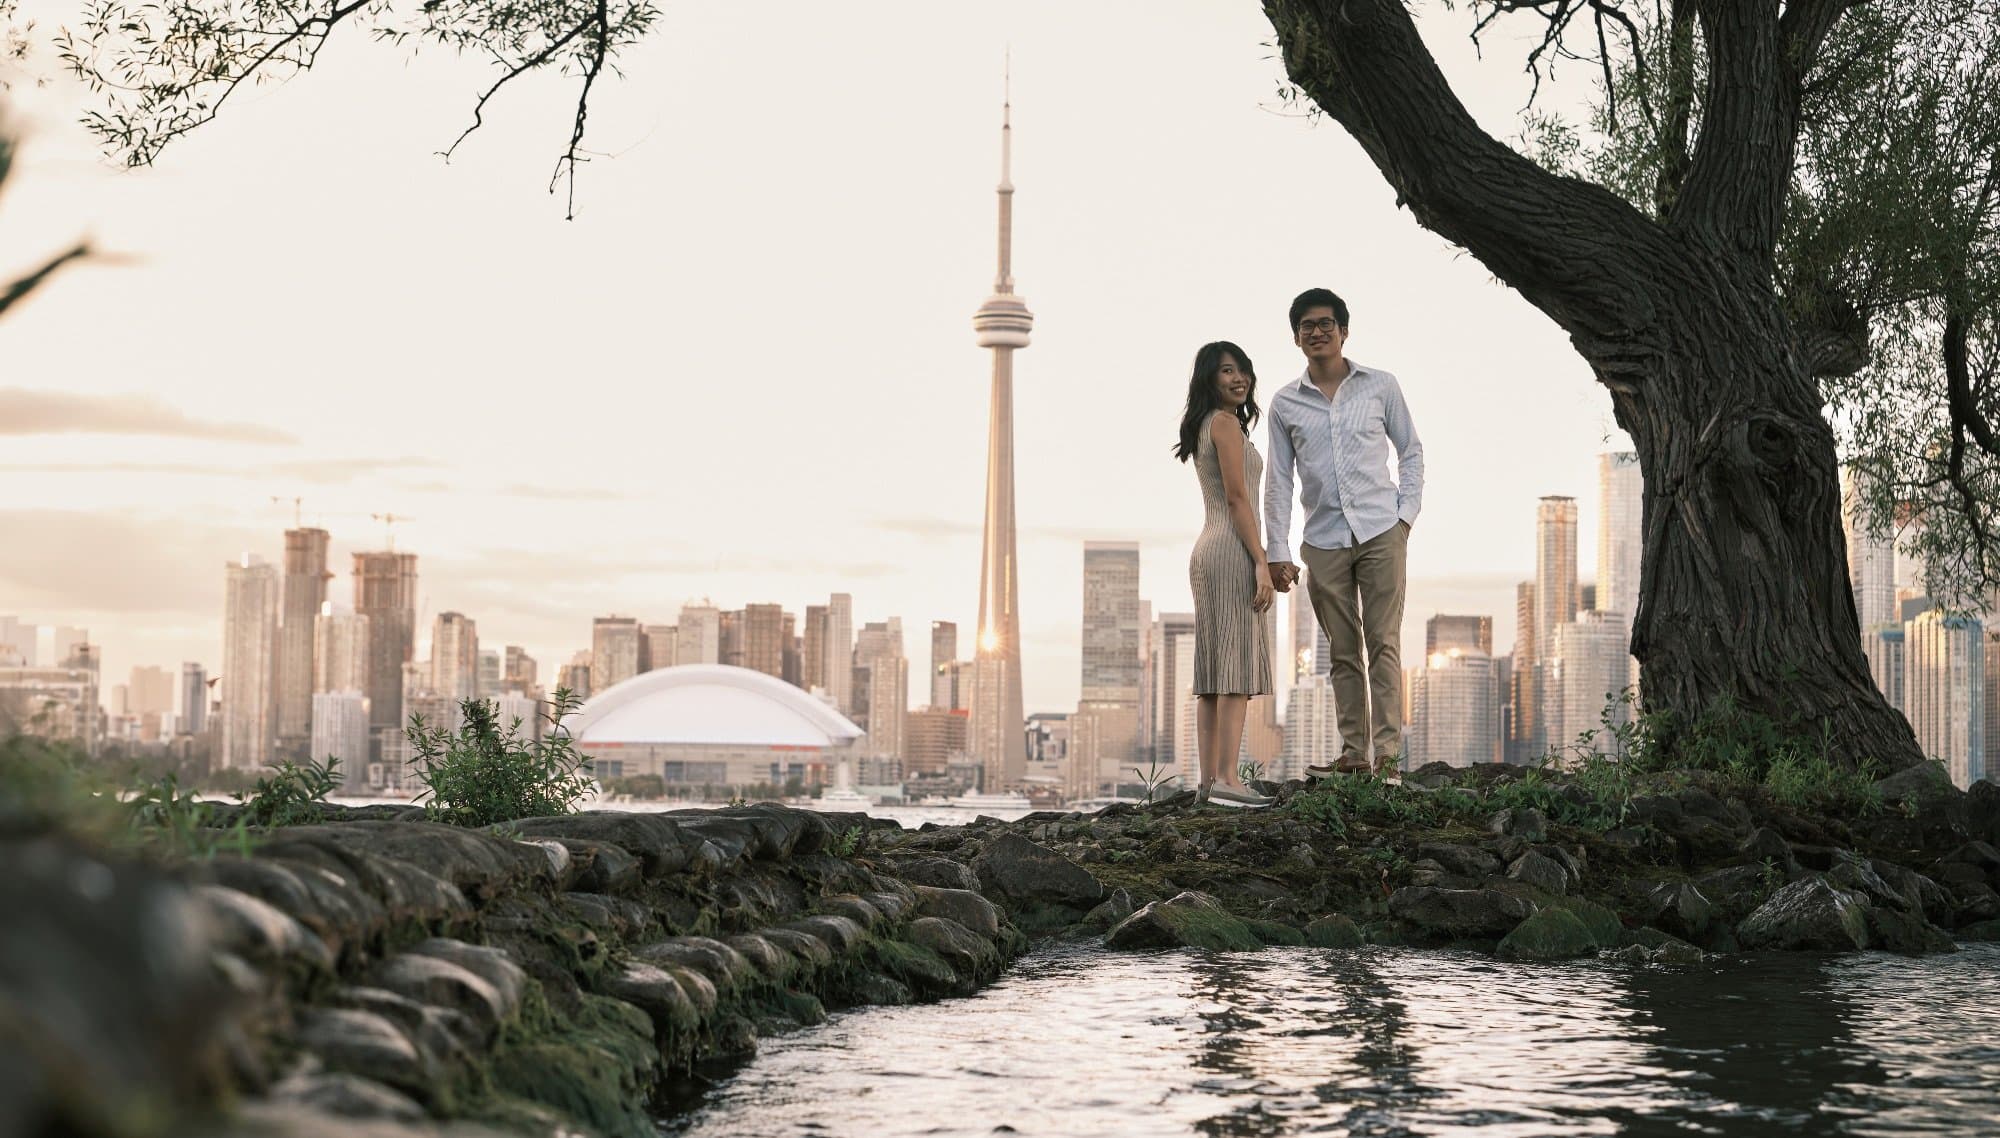 Sunset Serenade: Capturing Love on Toronto Islands with Minh & Bach